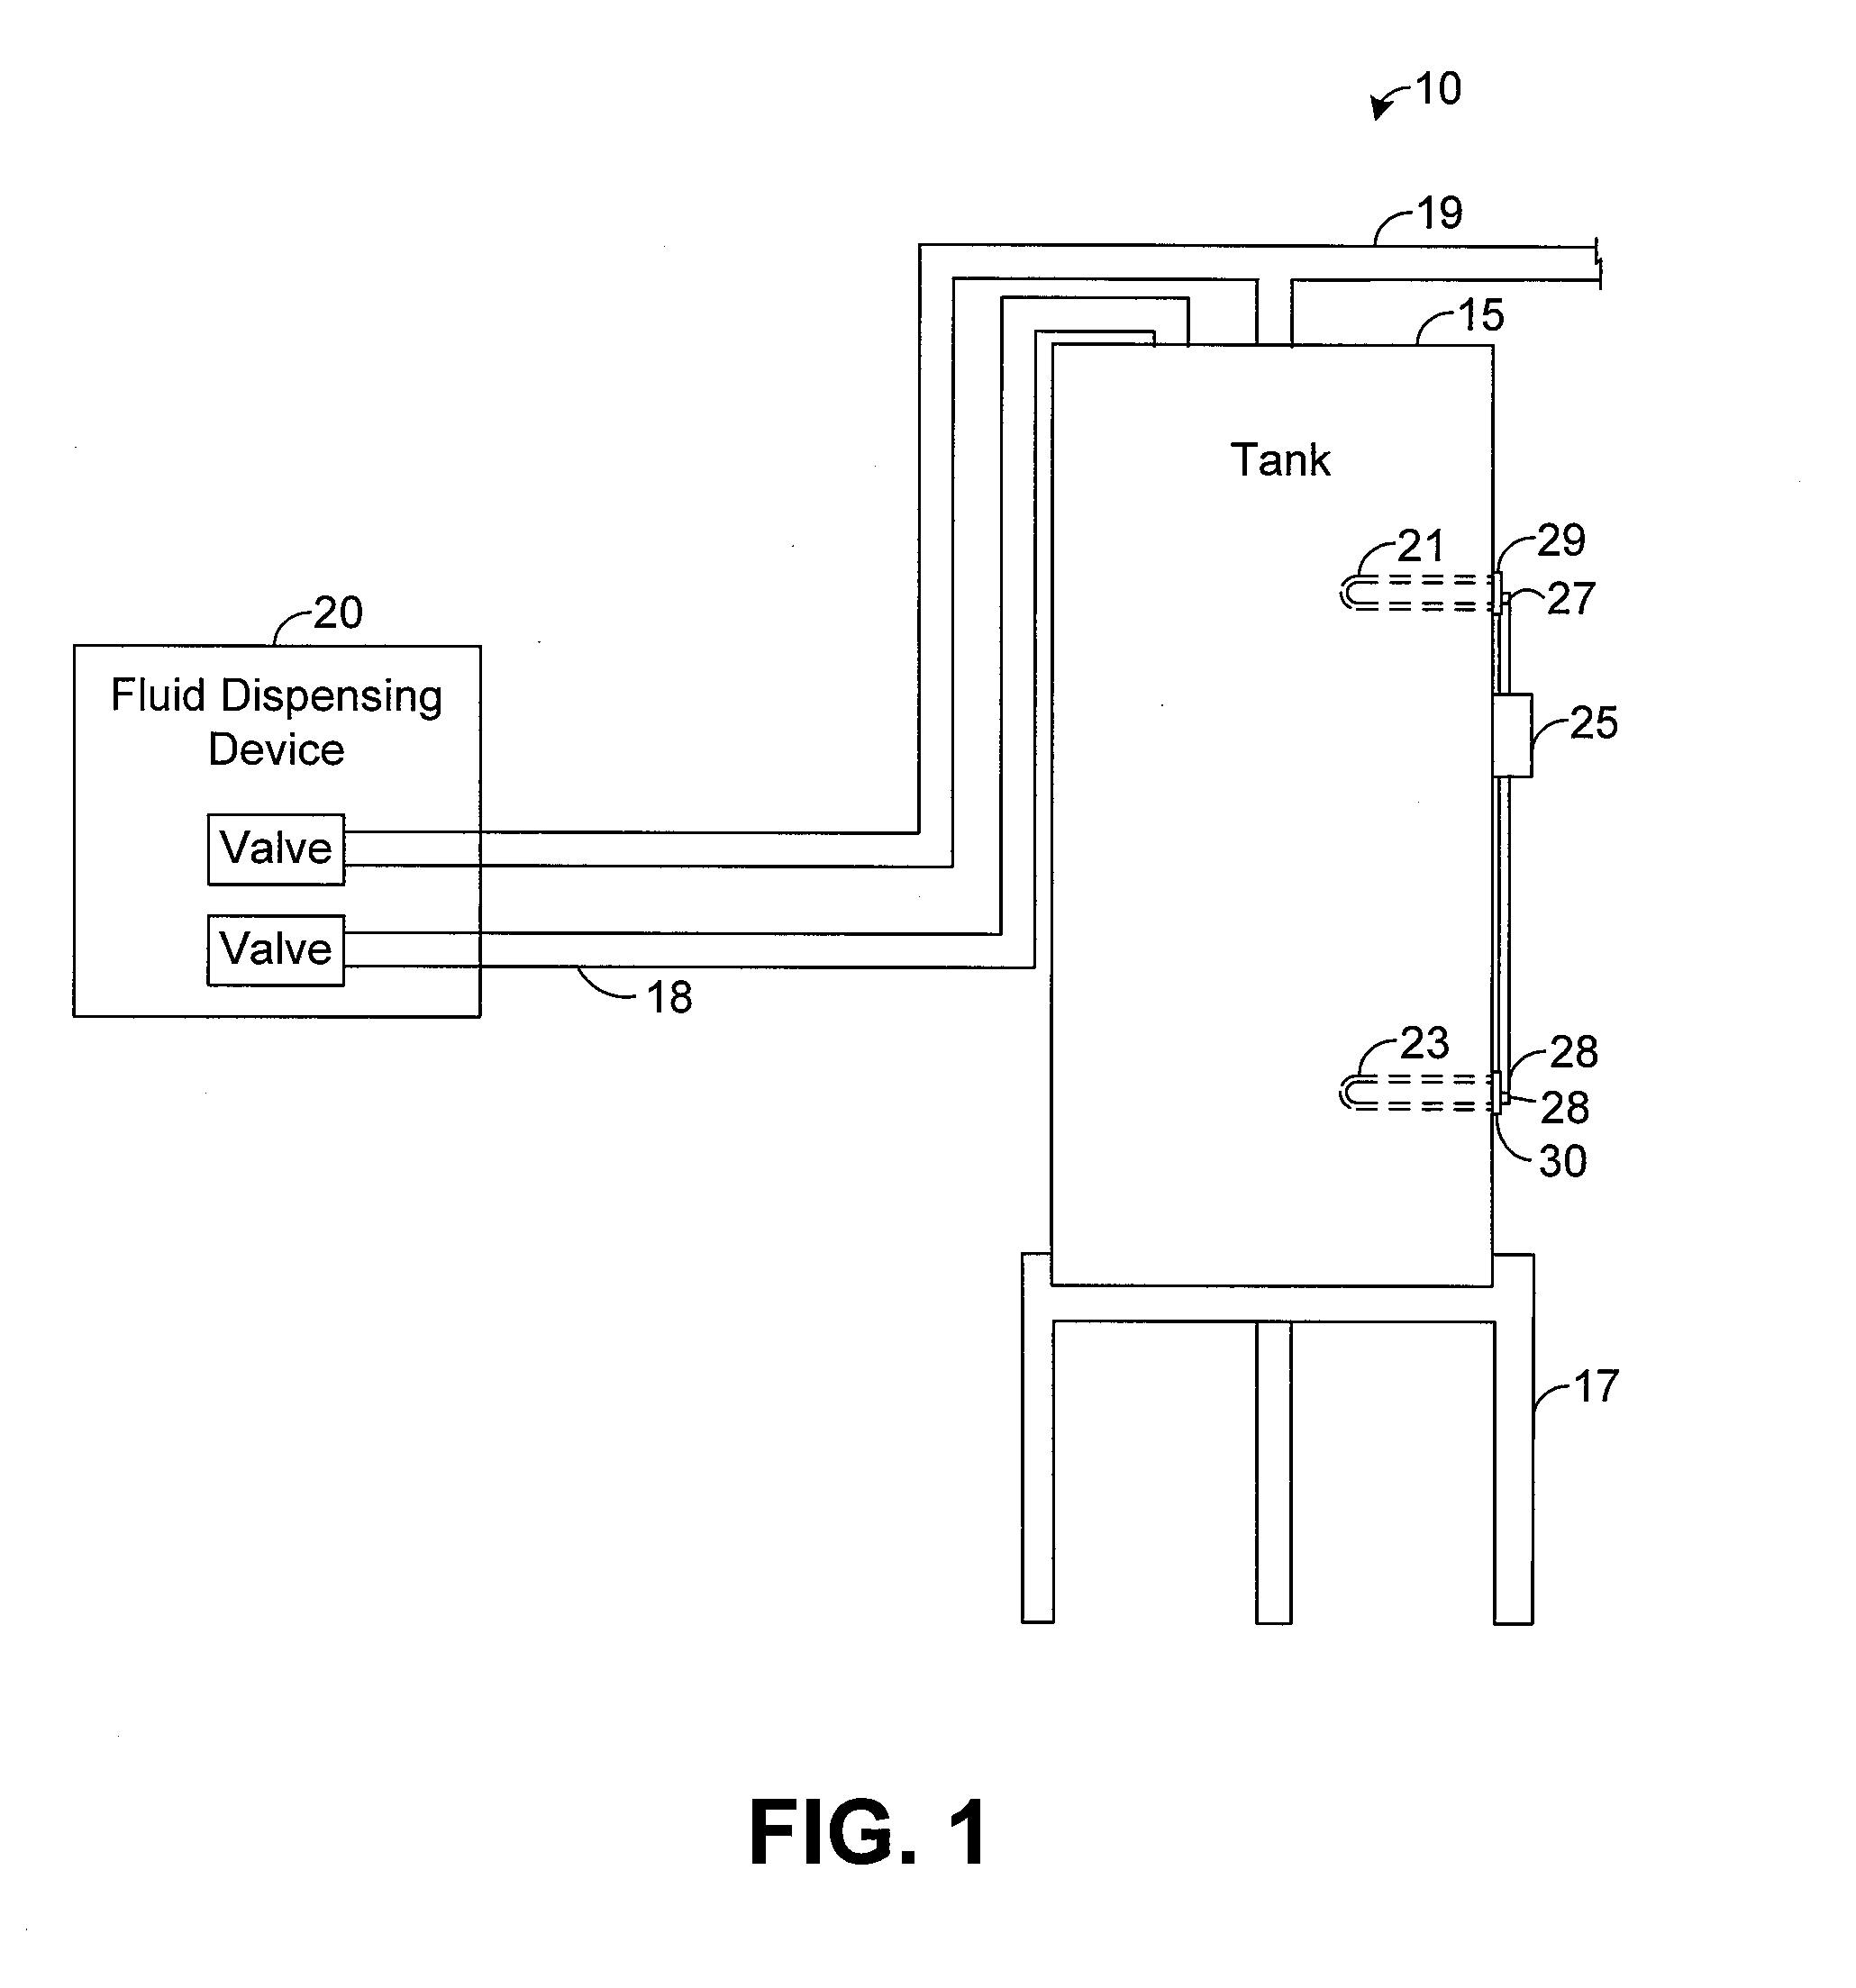 Water Heating Systems and Methods for Detecting Dry Fire Conditions